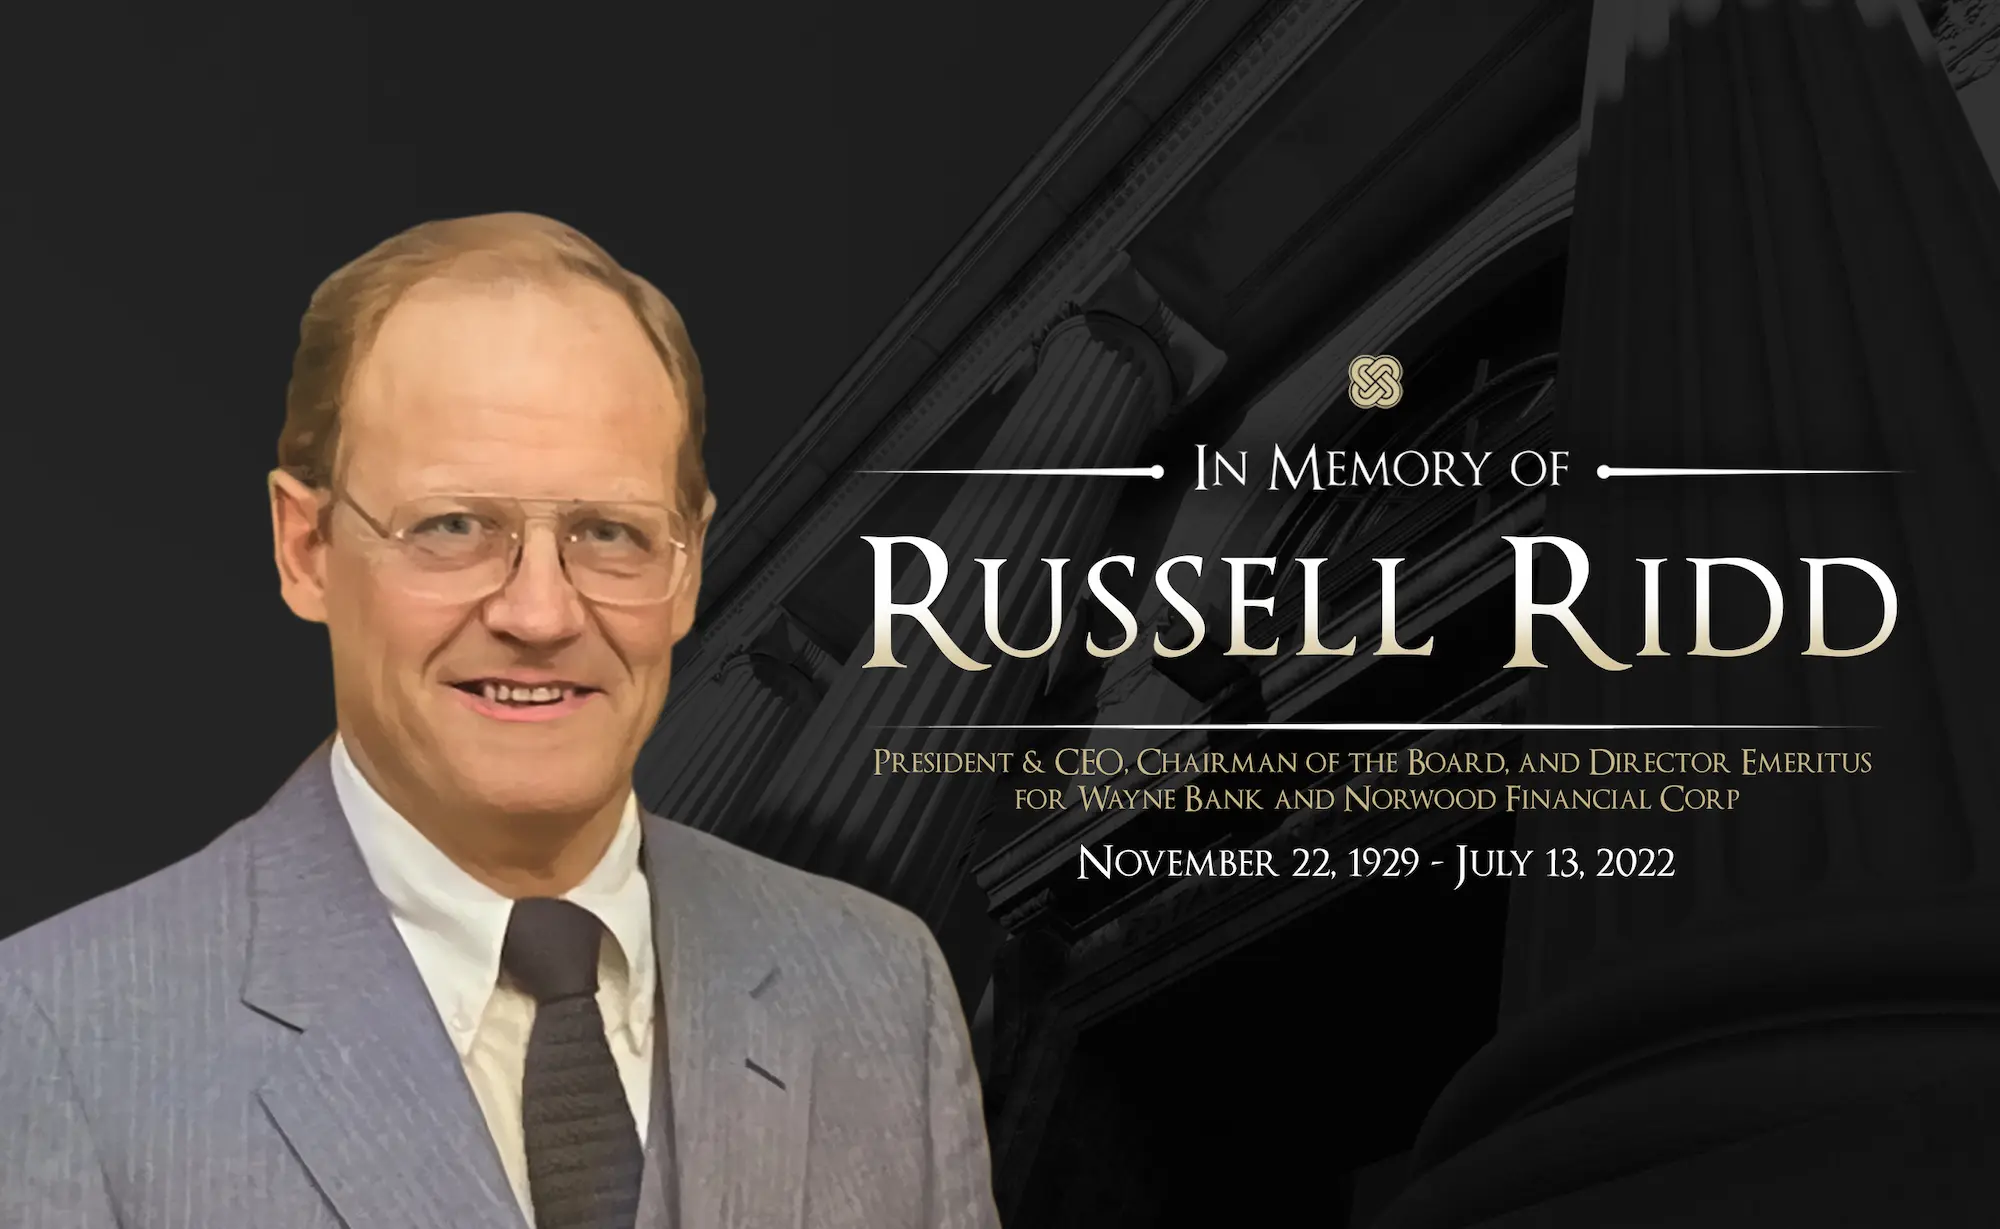 In Memory of Russell Ridd